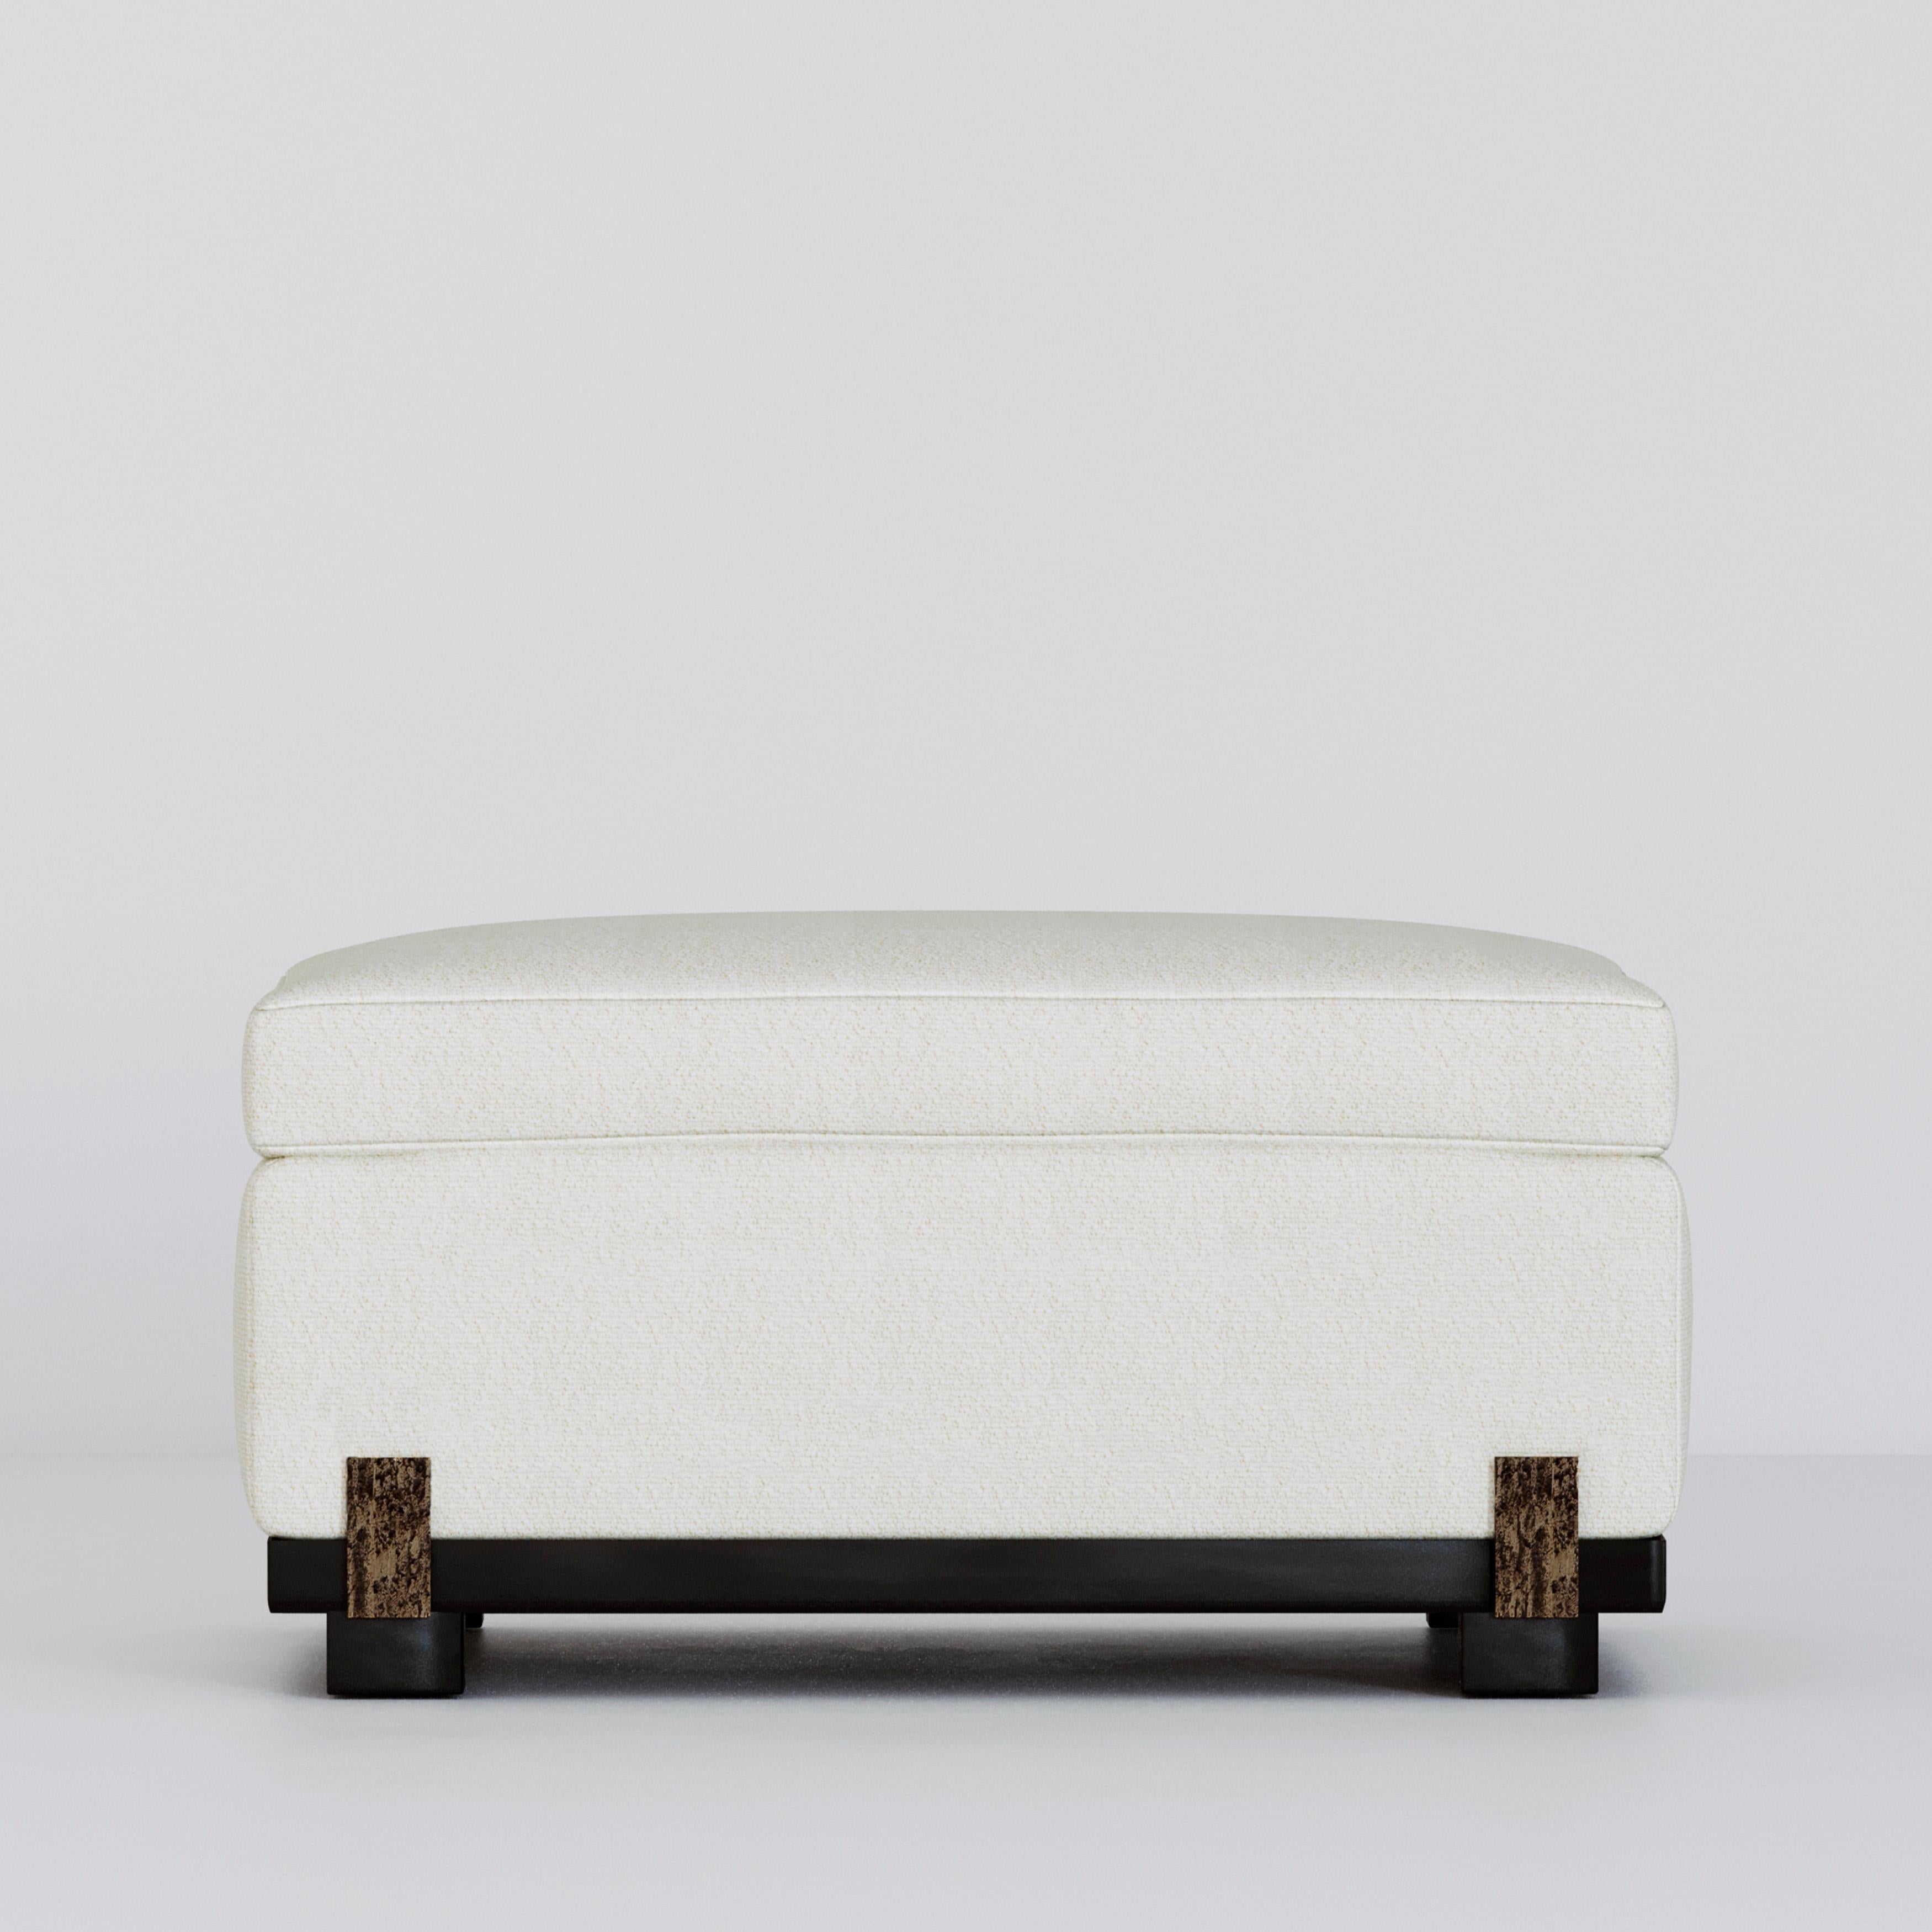 Ida Footstool, in Cast Bronze Details, Handcrafted in Portugal by Duistt

The ida footstool, crafted with great attention to details, is part of a luxurious collection set of two upholstery pieces and a side table. The Ida foot stool piece that will